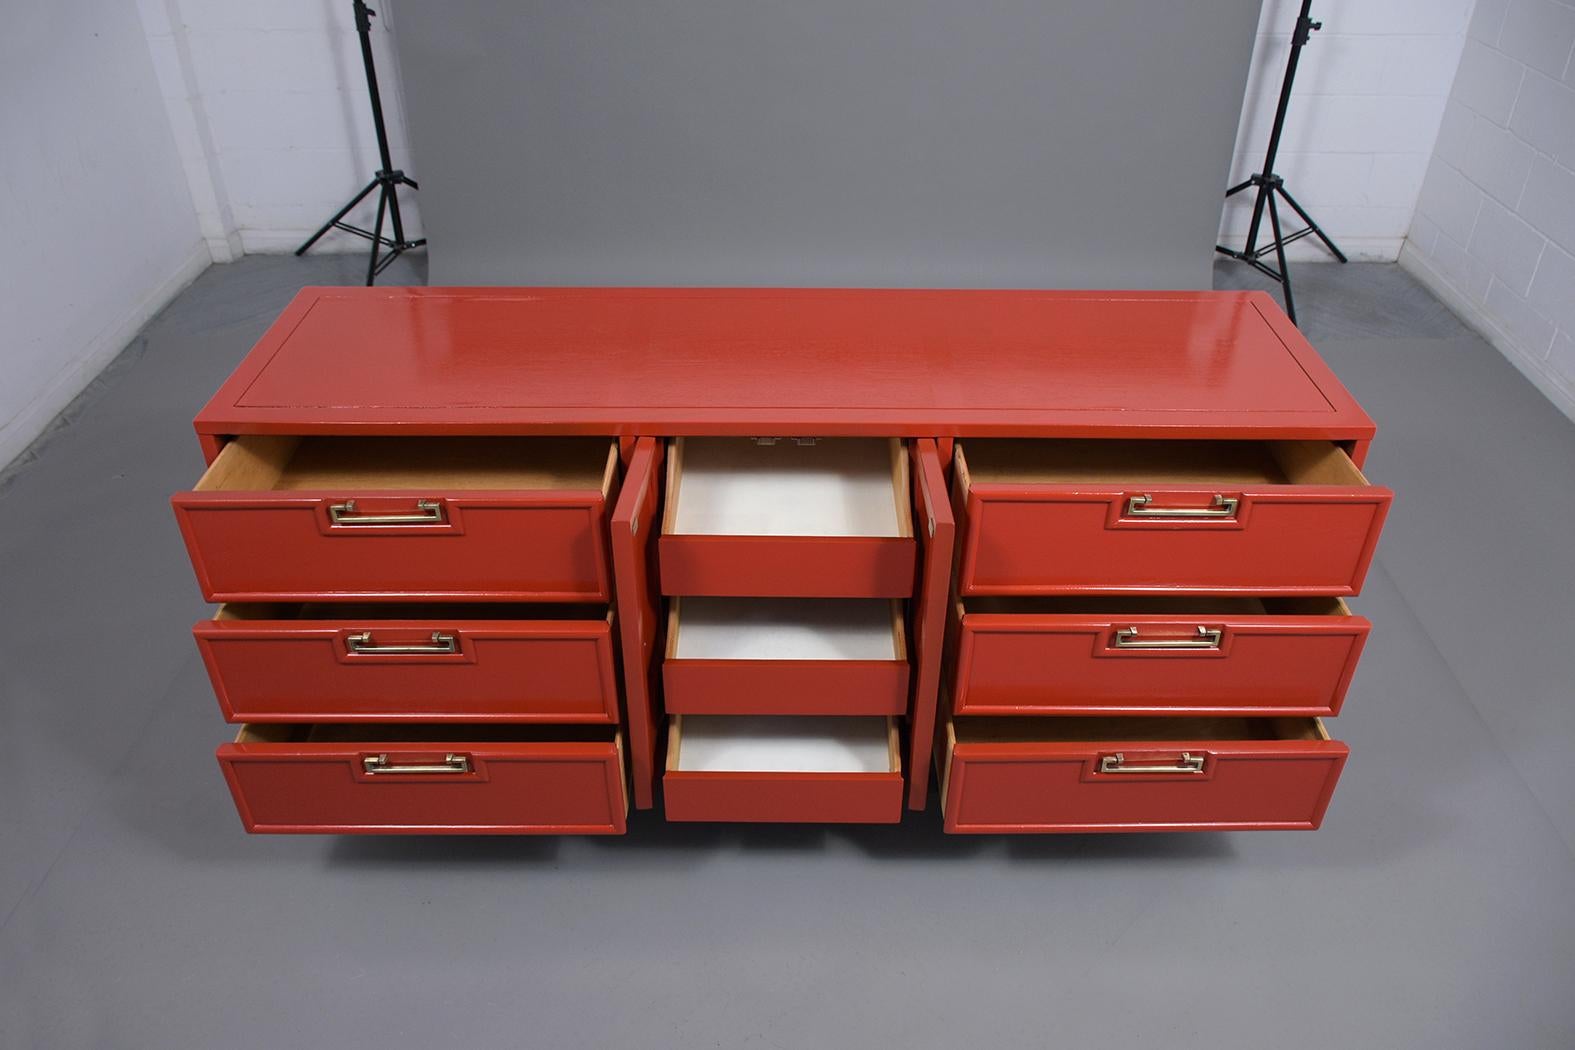 An extraordinary 1960's mid-century modern credenza made out of maple wood, is newly stained in a red & ebonized color combination with lacquer finish and has been professionally restored. This chest of drawers is eye-catching features six drawers,